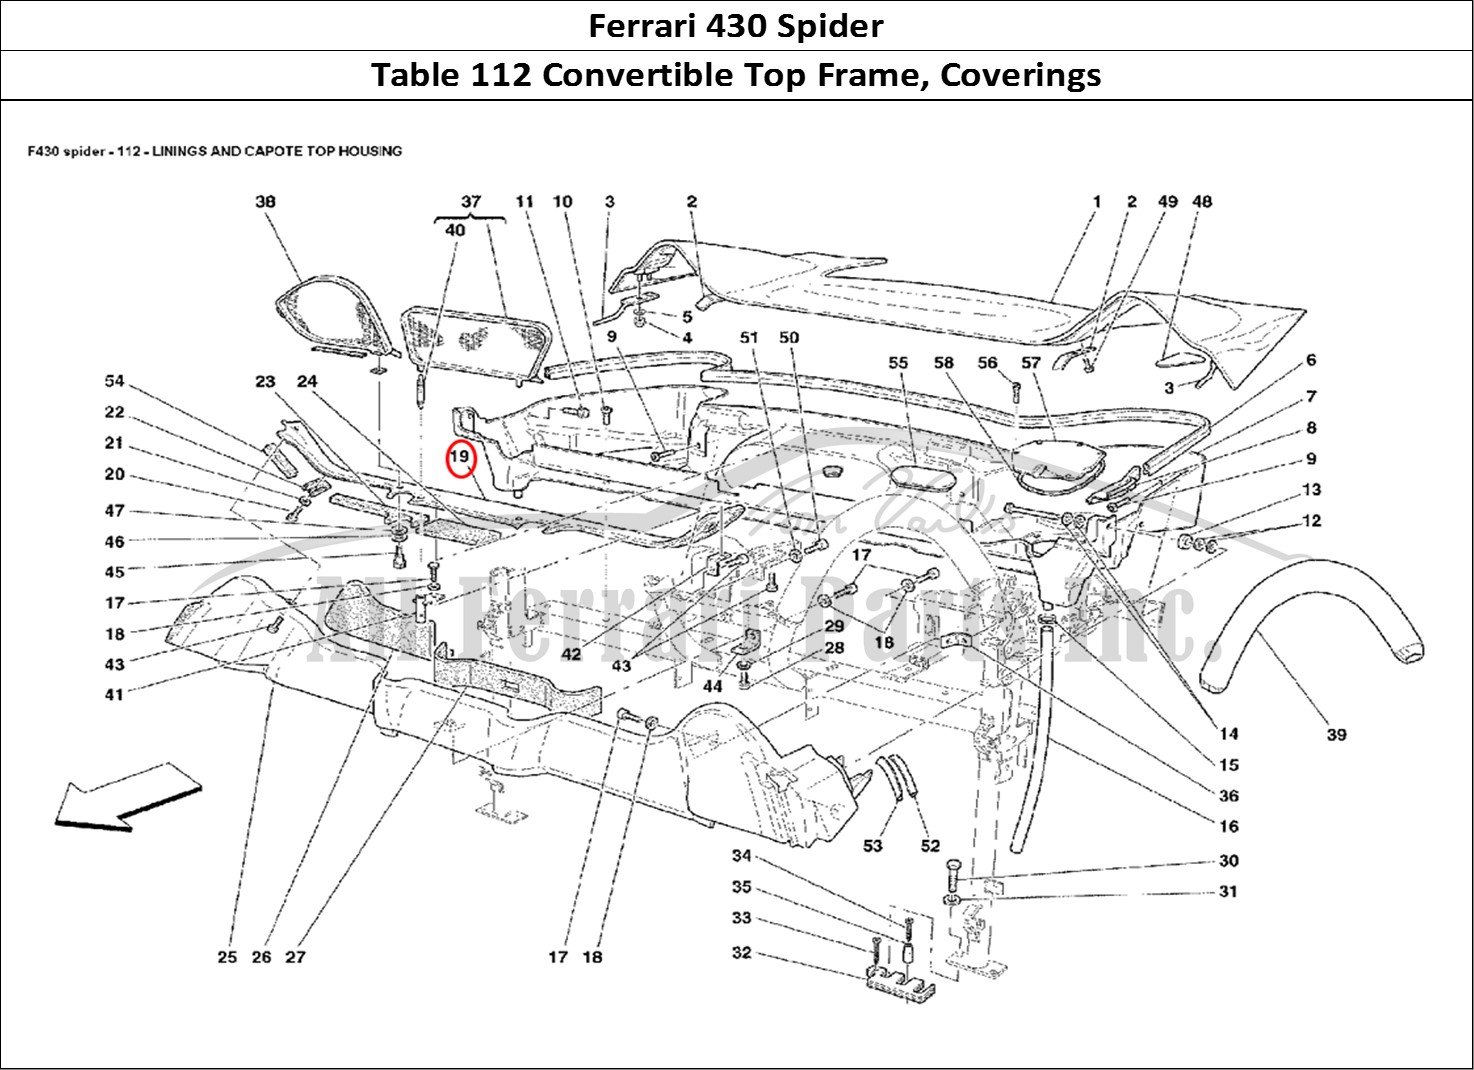 Ferrari Parts Ferrari 430 Spider Page 112 Linings and Capote Top Ho